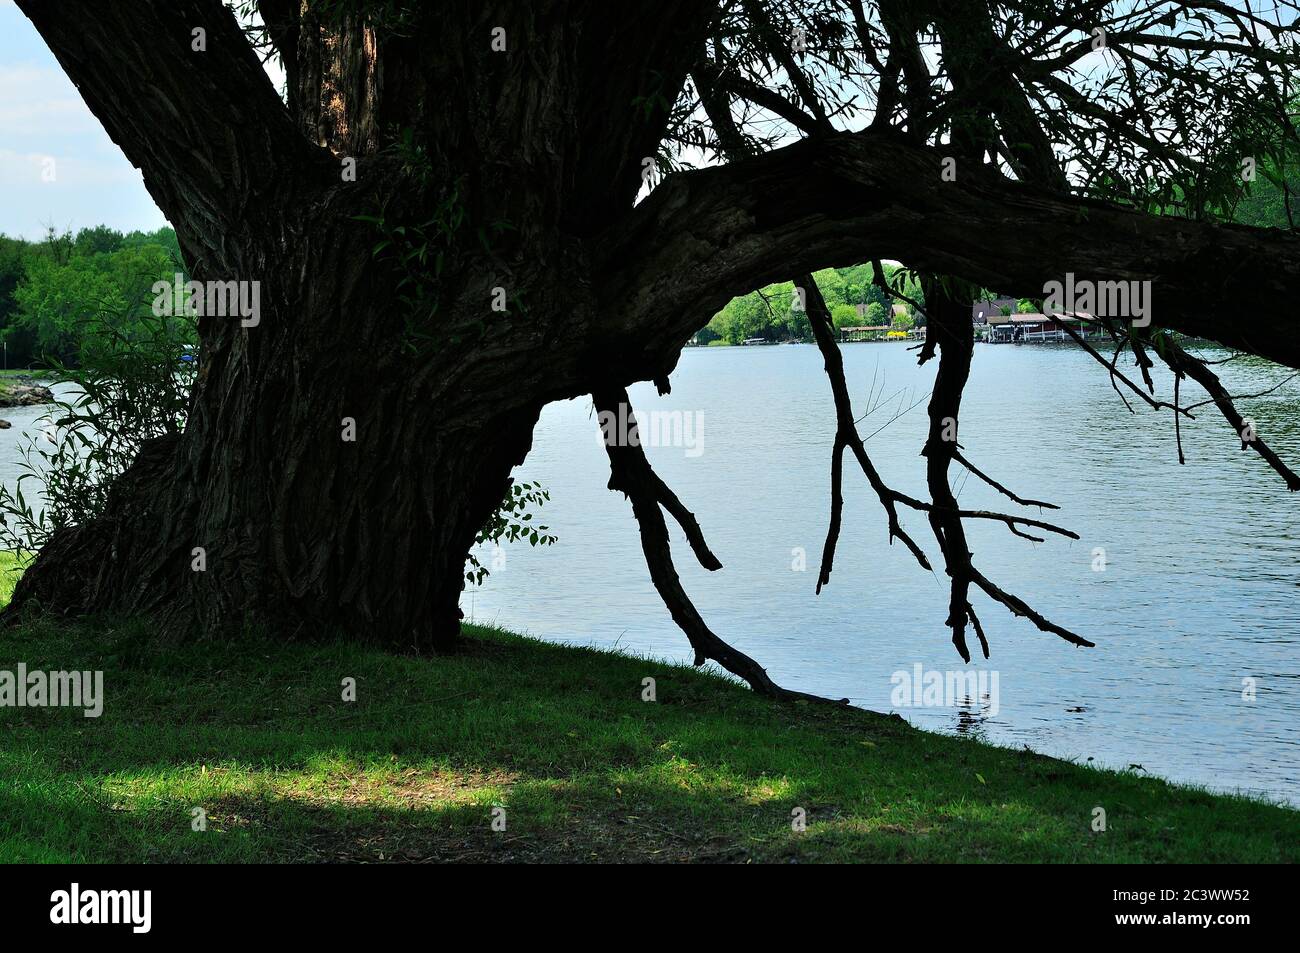 Large willow tree on banks of Fox River in Northern Illinois, USA. Stock Photo